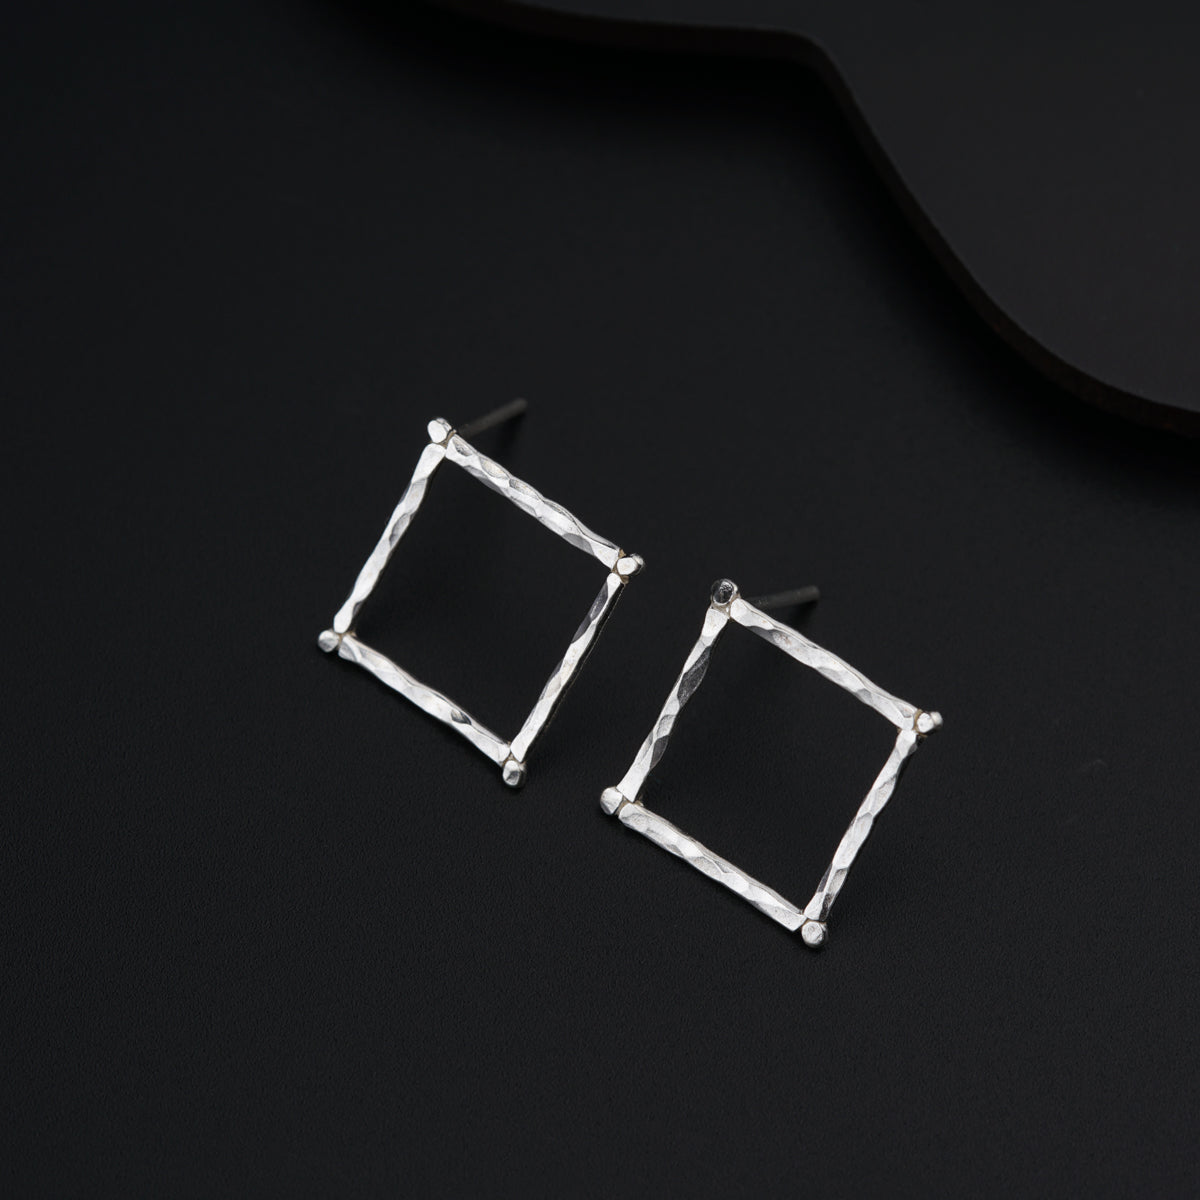 a pair of square earrings on a black surface